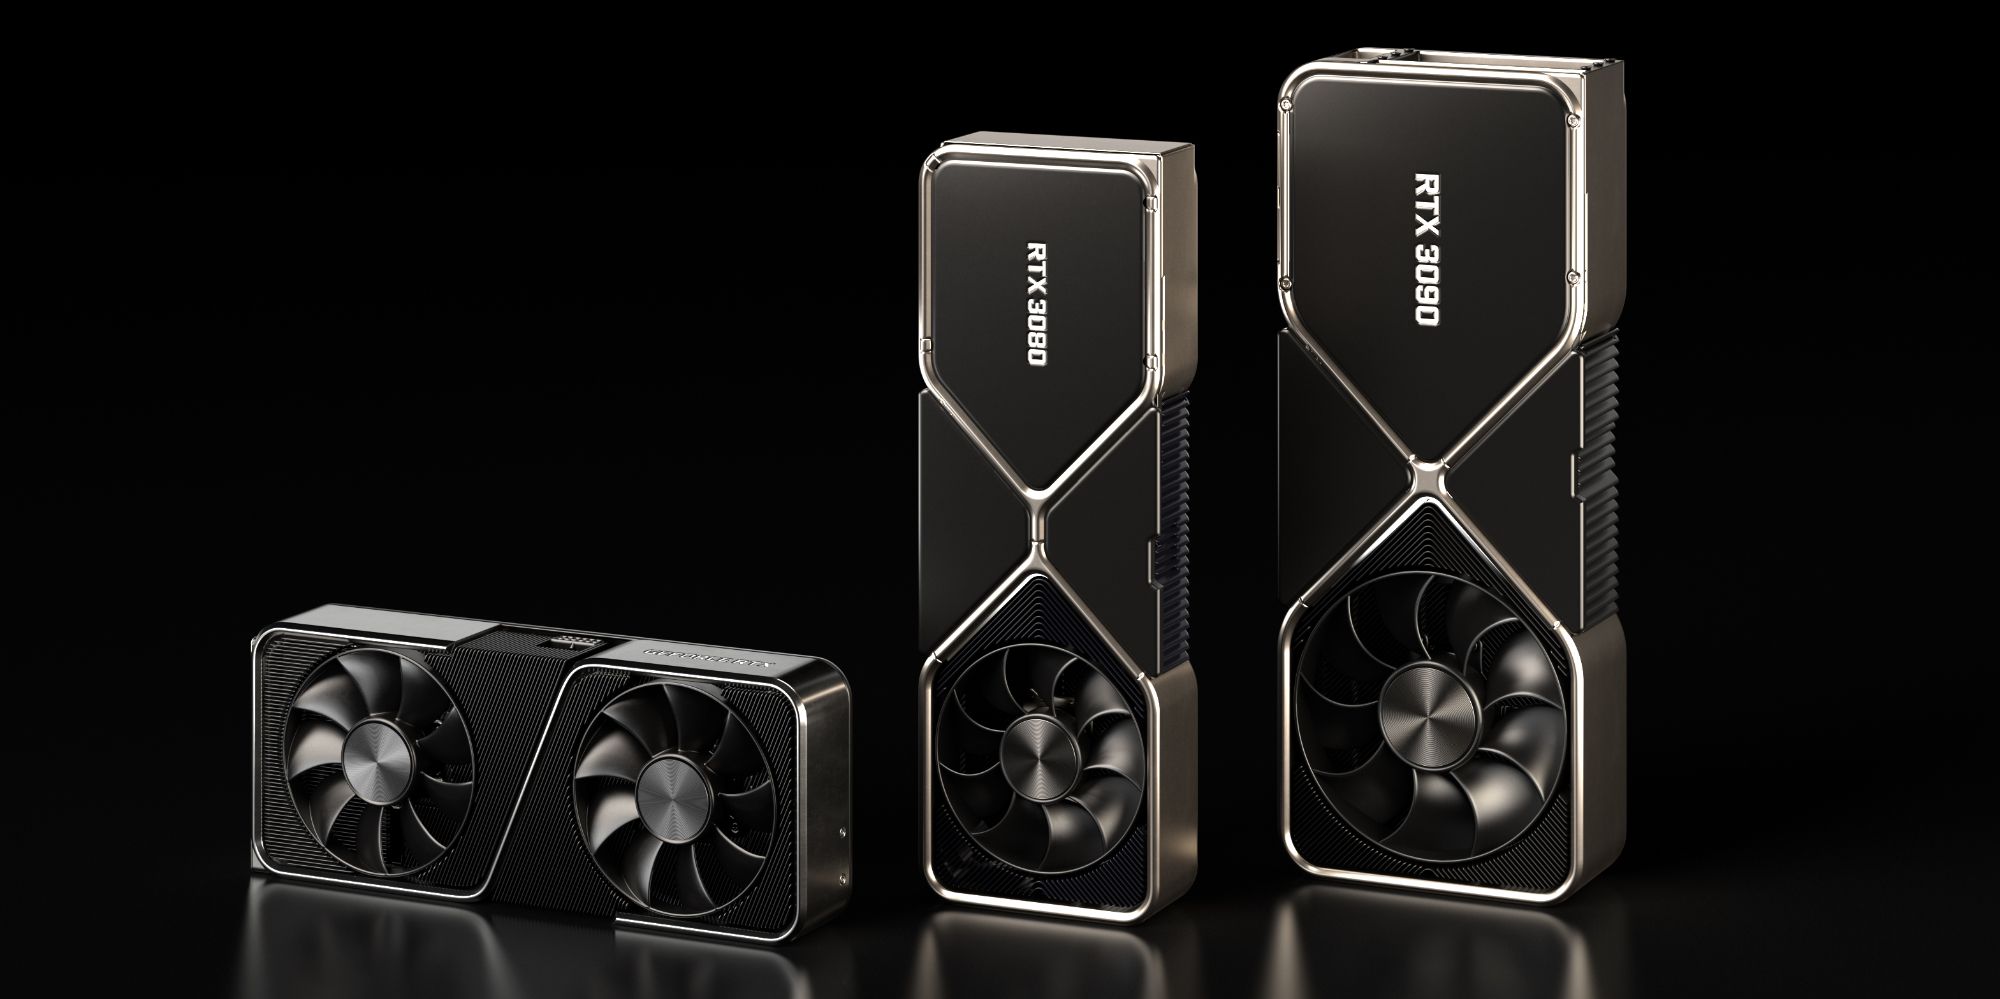 Nvidia RTX 30 series of graphics cards